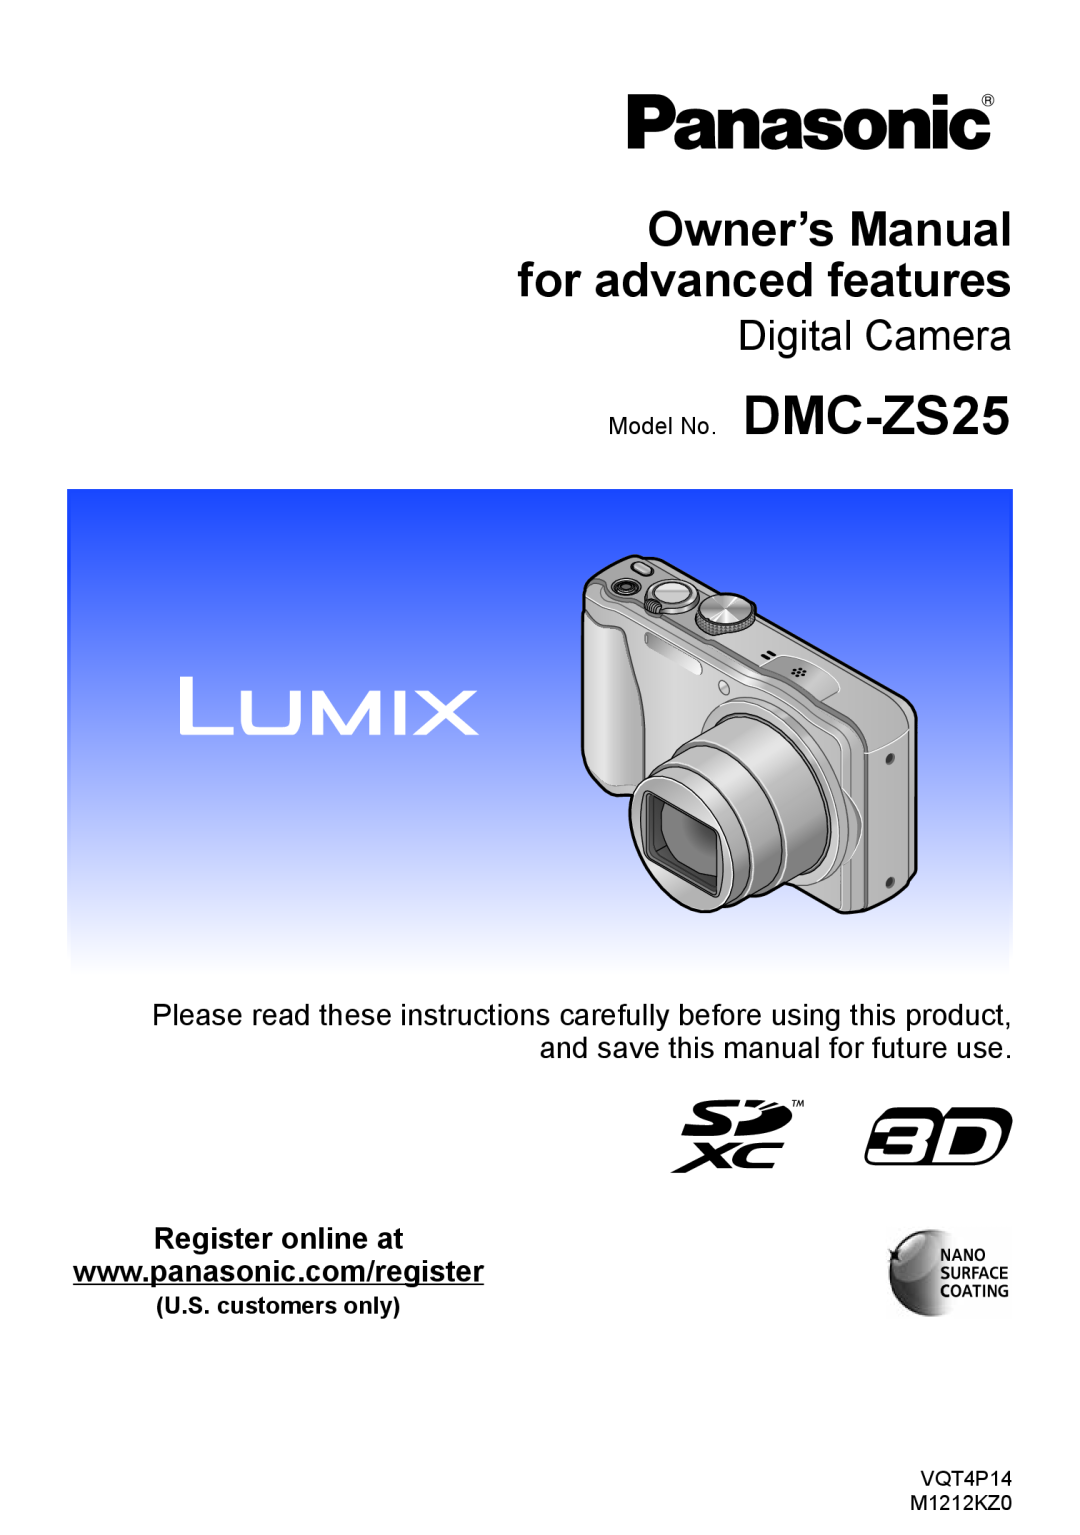 Panasonic DMCZS25K, DMC-ZS25 owner manual Register online at, U.S. customers only, Owner’s Manual for advanced features 